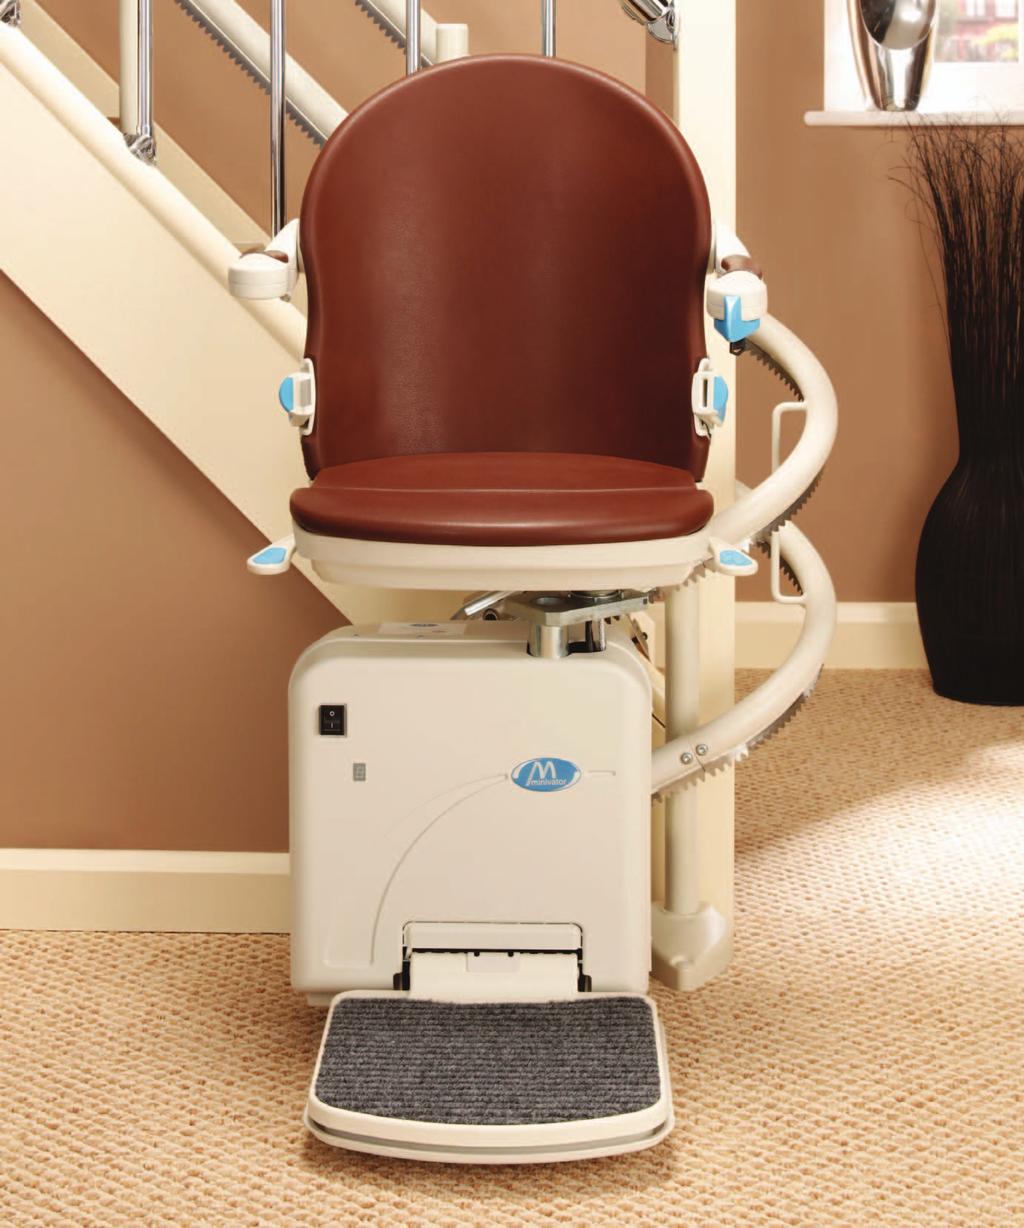 Minivator 2000 Curved Stairlift The Minivator 2000 curved track system is tailored to your individual staircase, ensuring the best fit possible.